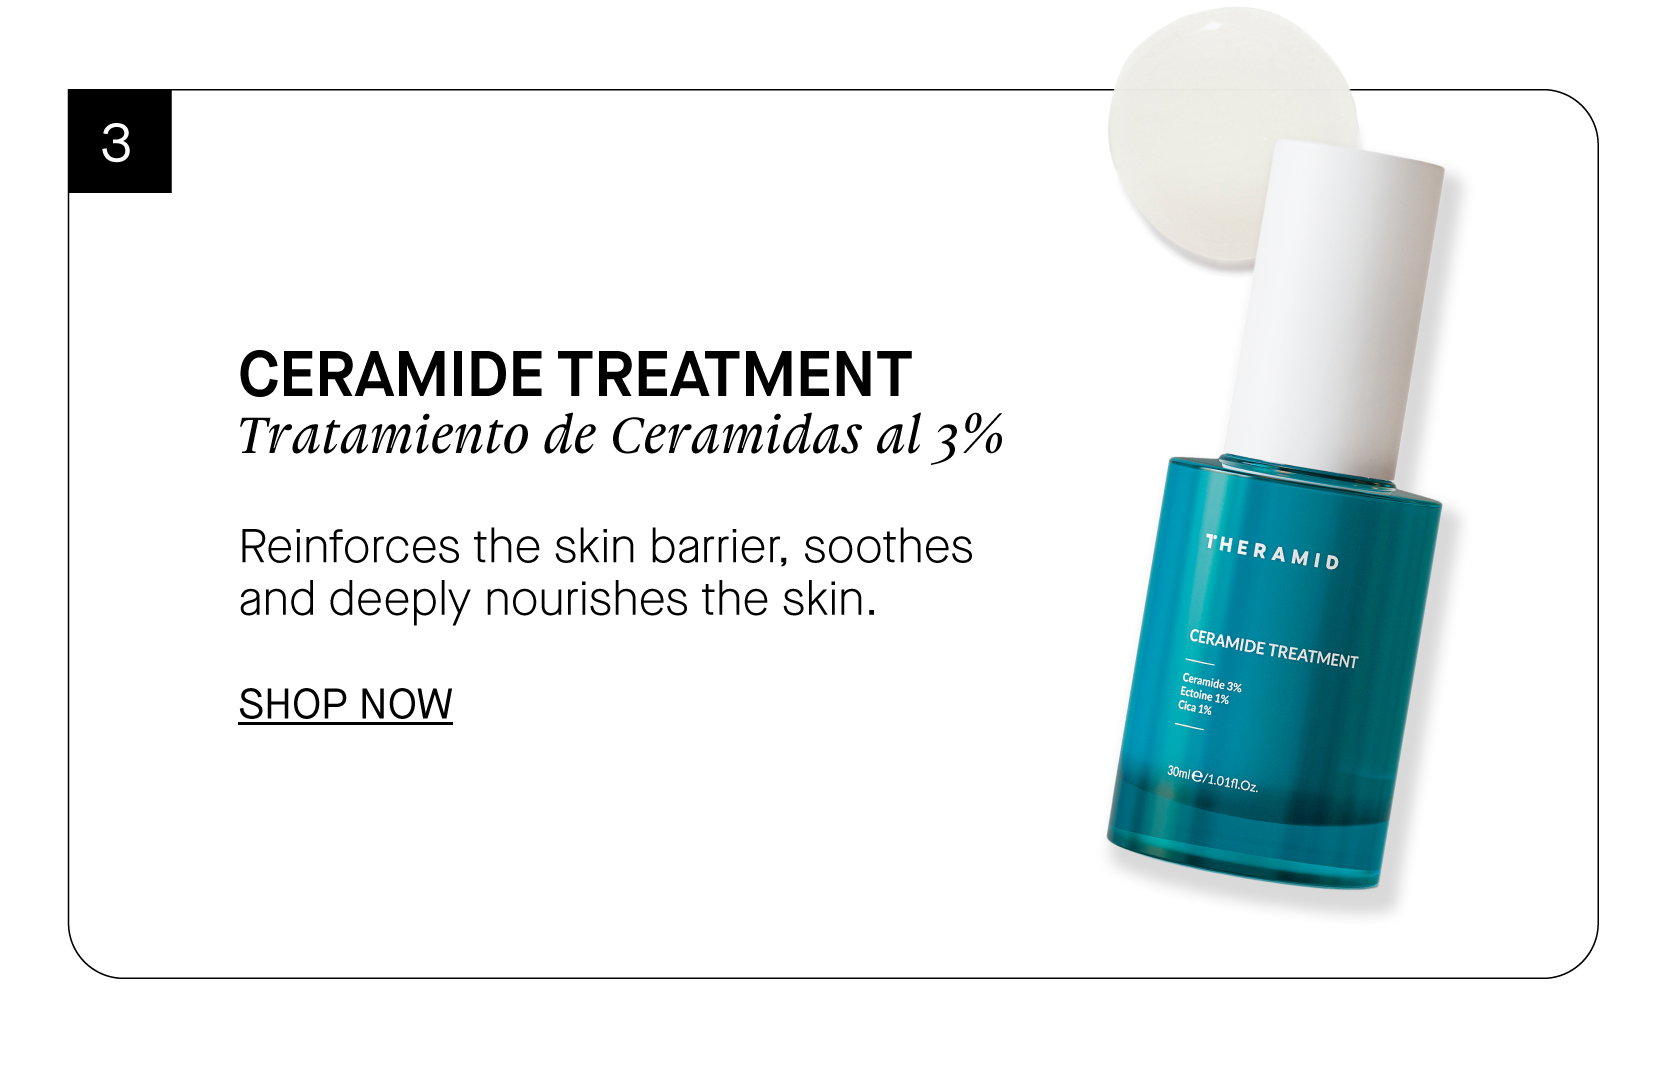  CERAMIDE TREATMENT Tratamiento de Ceramidas al 3% Reinforces the skin barrier, soothes and deeply nourishes the skin. SHOP NOW 